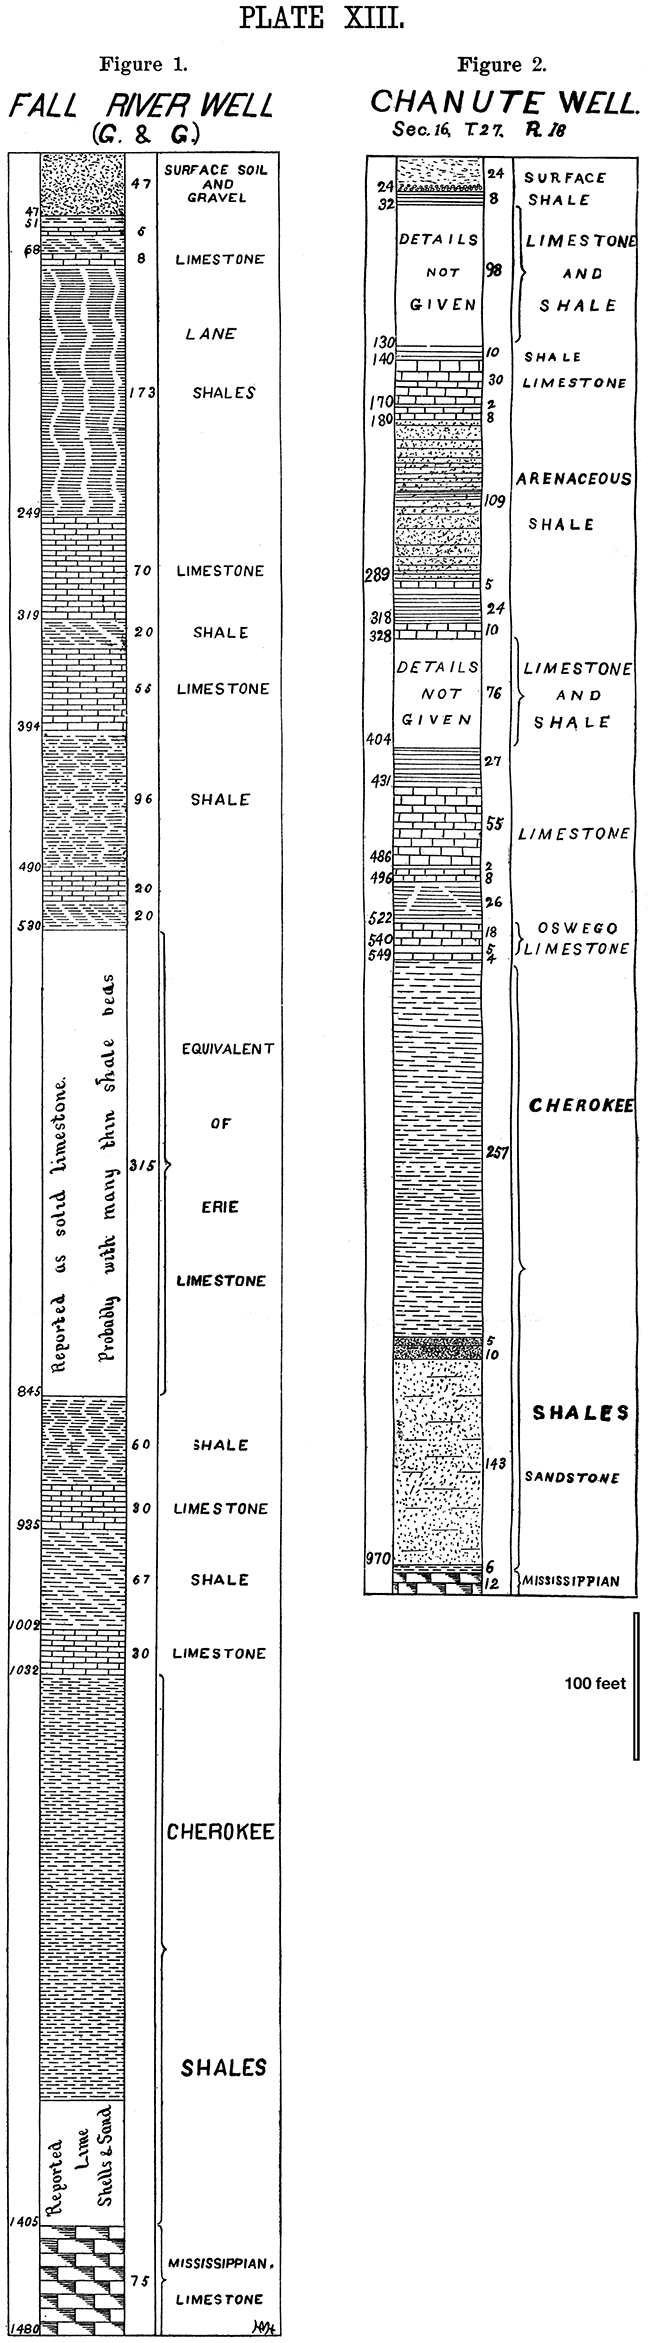 Two stratigraphic columns from the Fall River and Chanute wells.